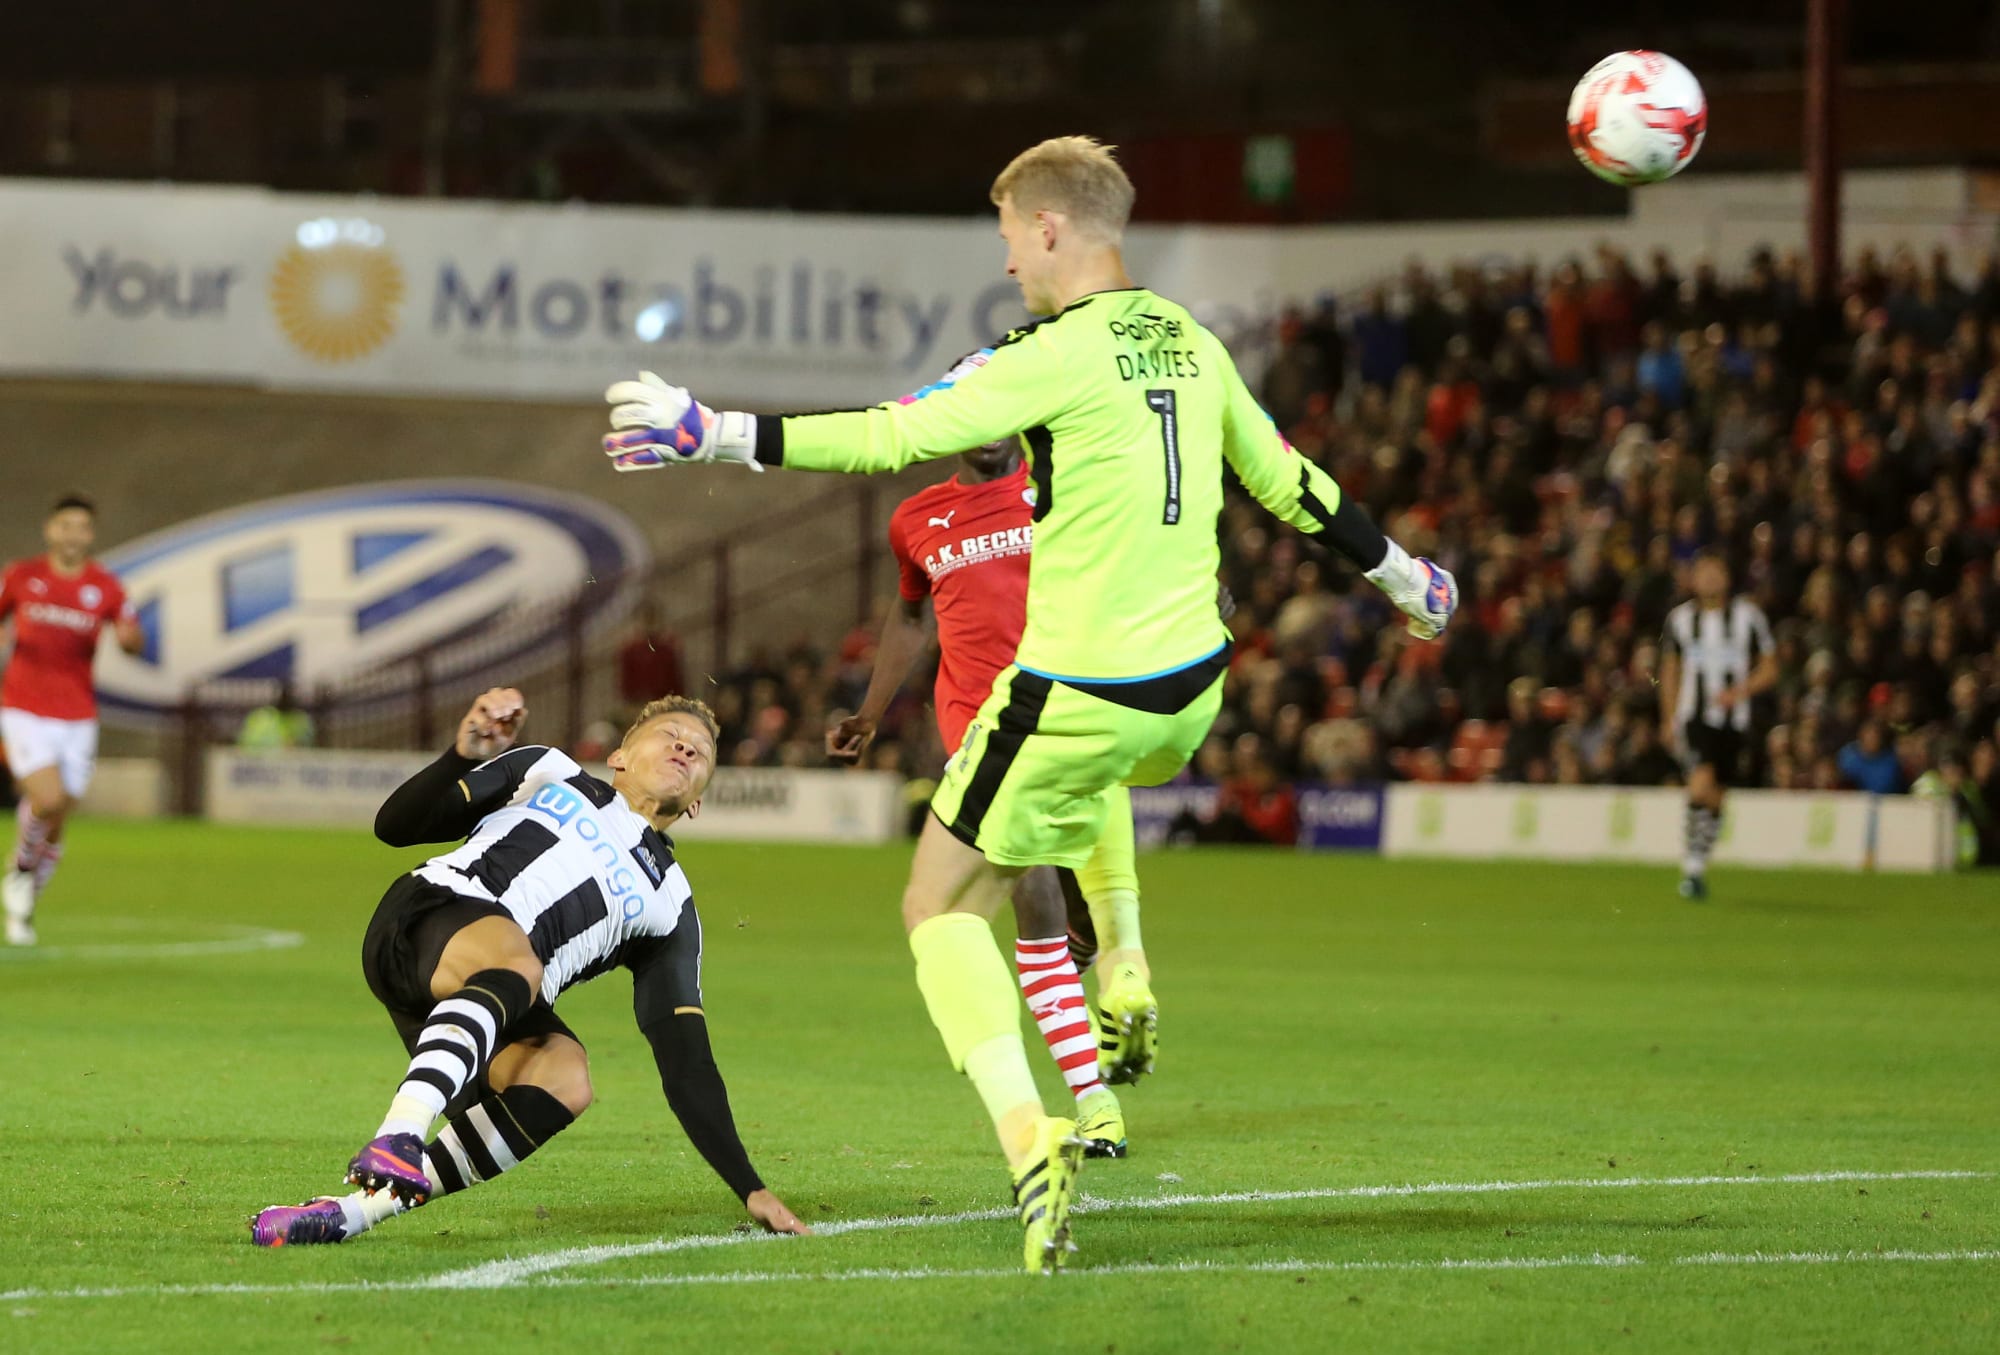 Barnsley 0 - 2 Newcastle: Watch the match highlights here